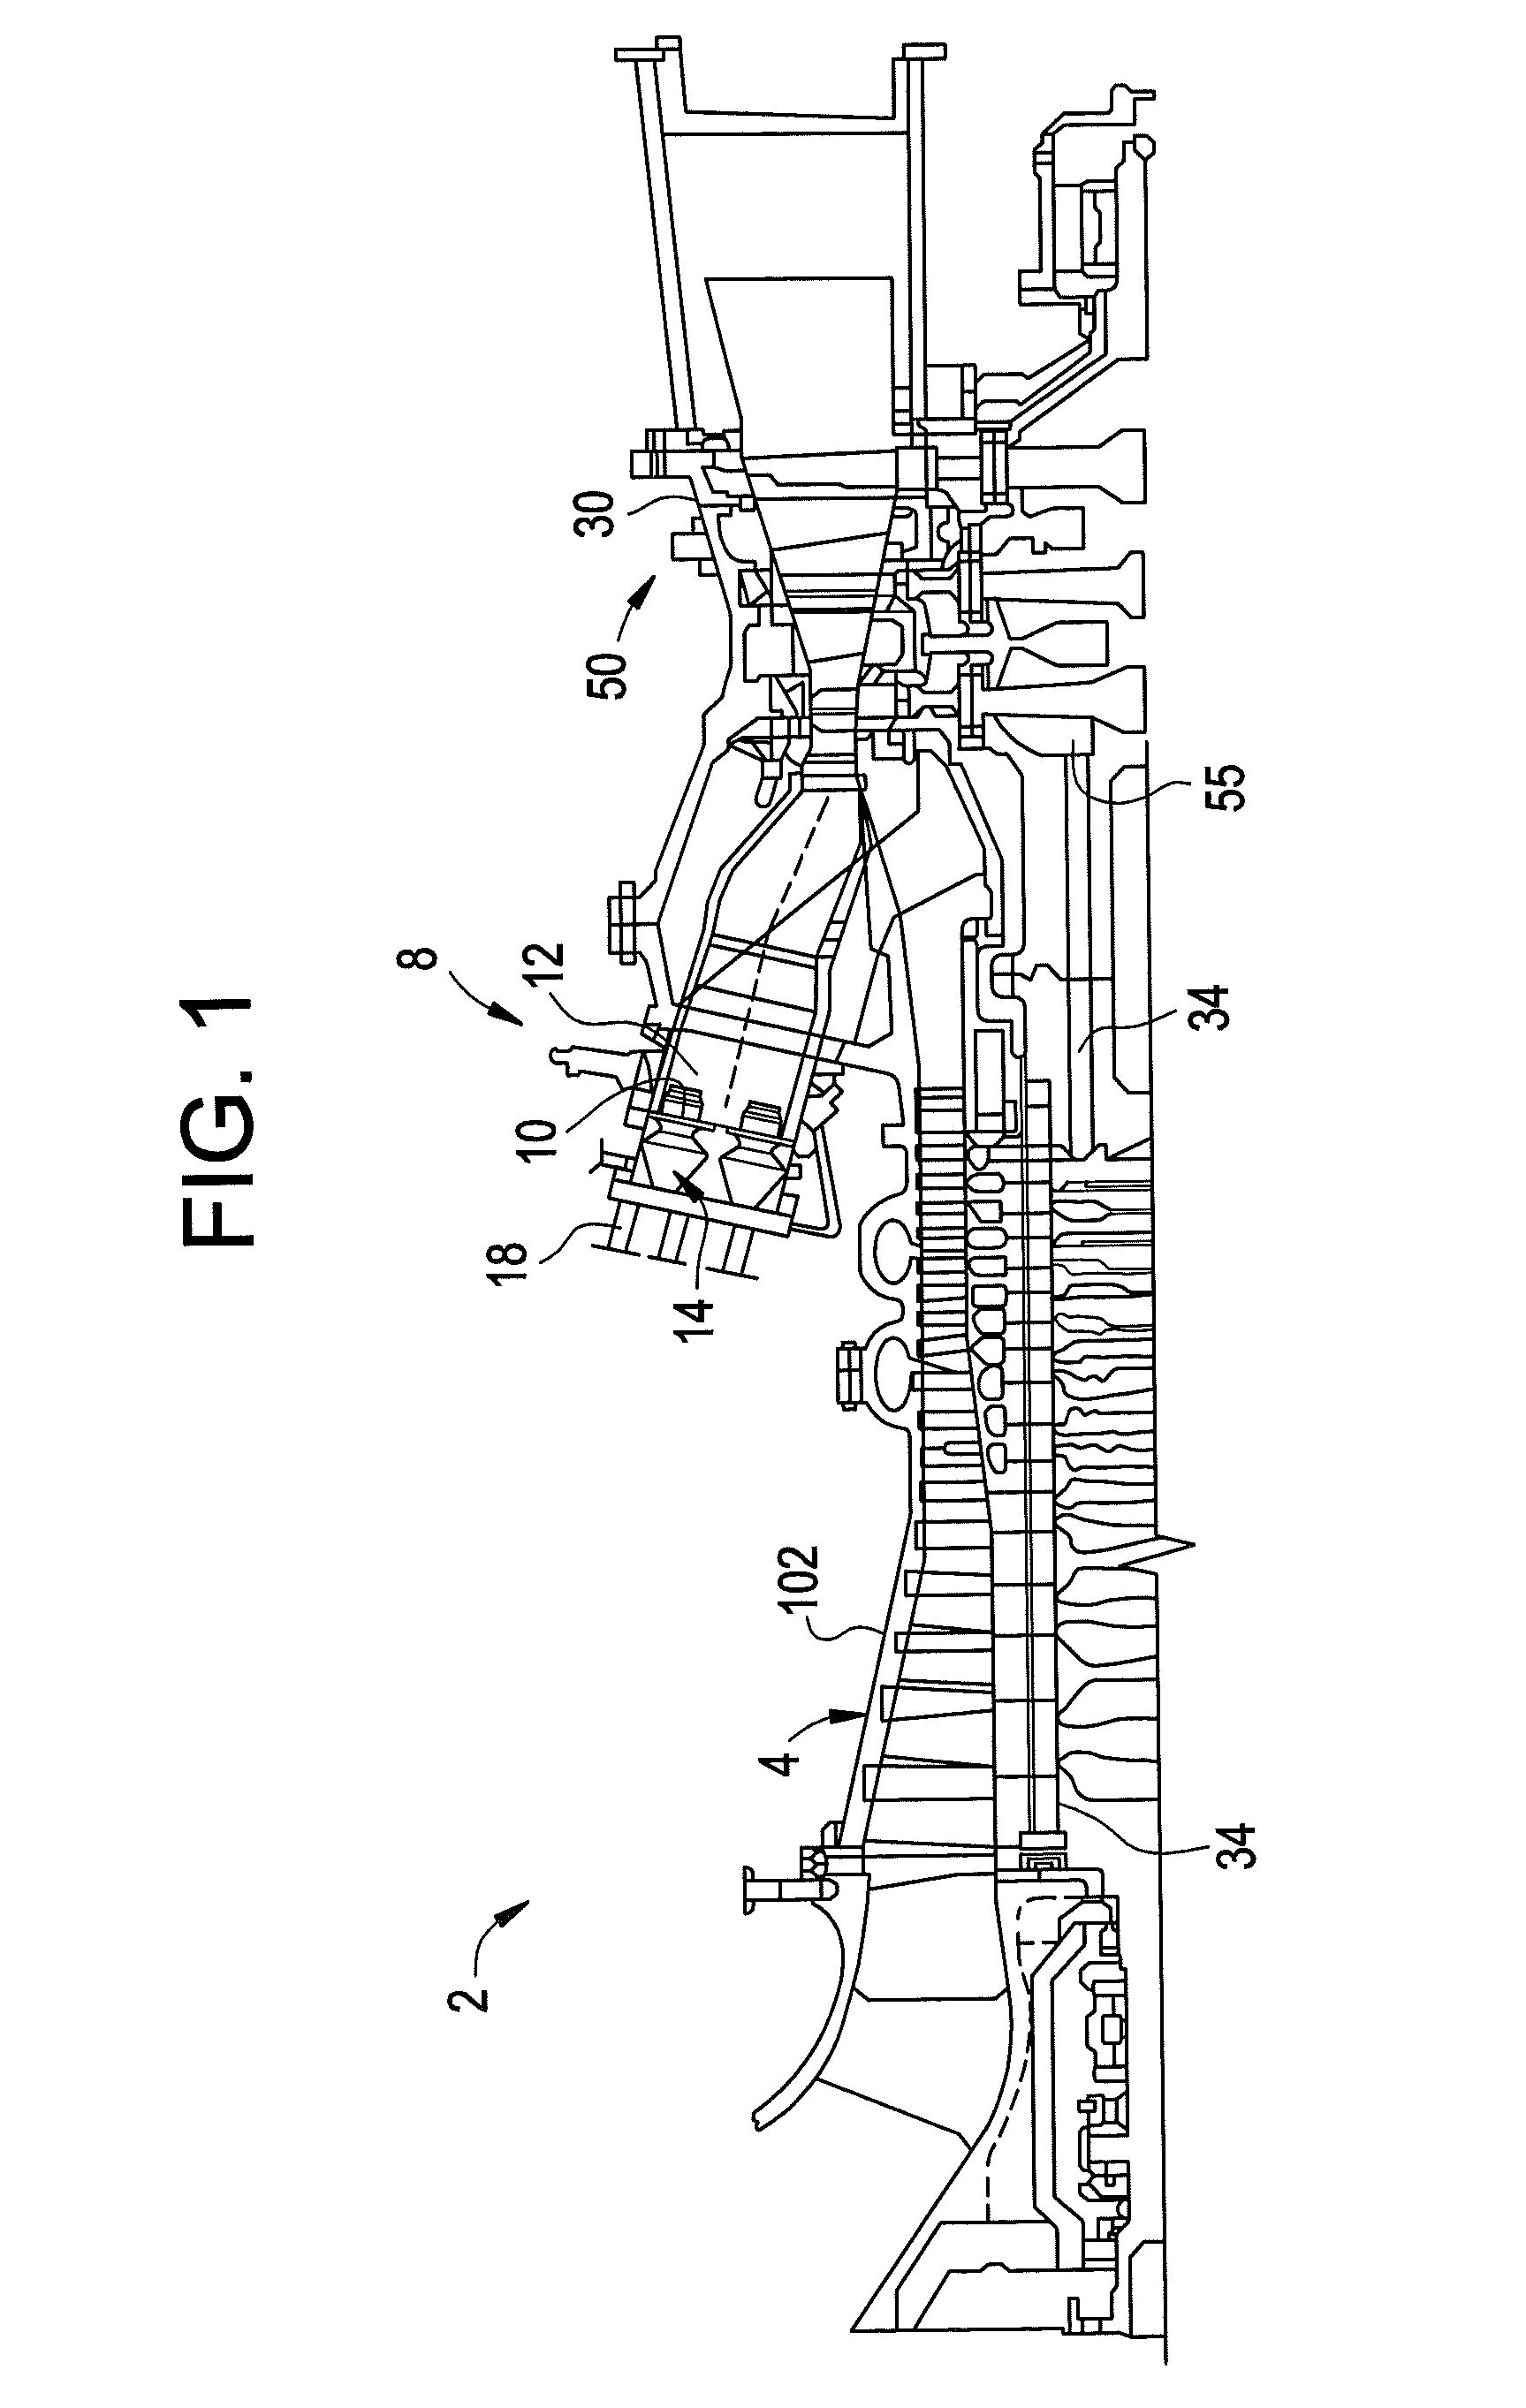 Multi-tube thermal fuse for nozzle protection from a flame holding or flashback event